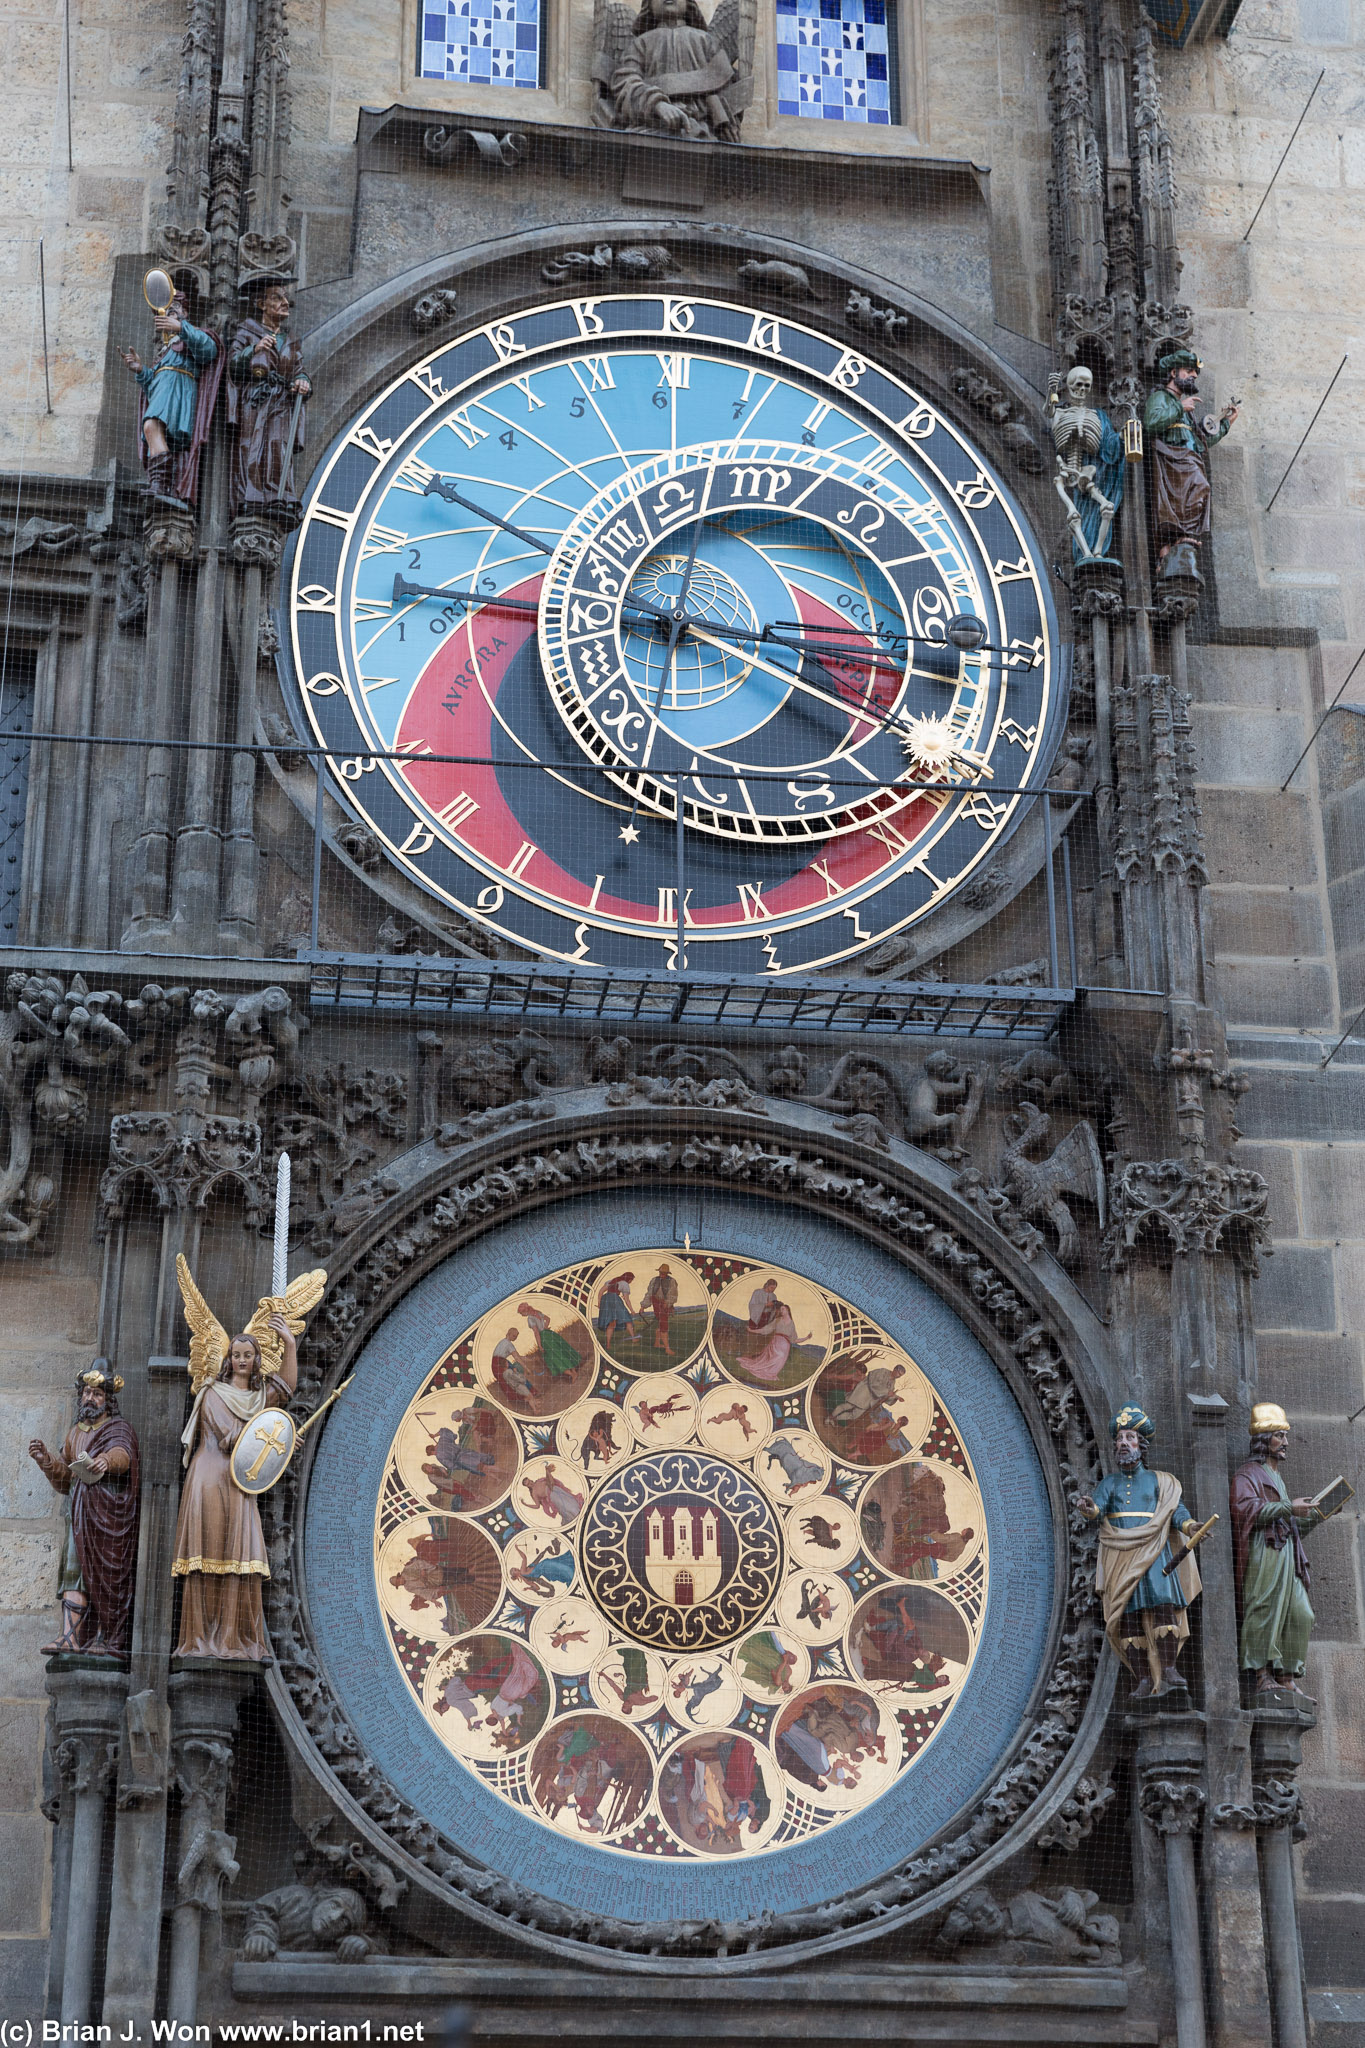 Astronomical clock, third-oldest in the world and the oldest still operating.